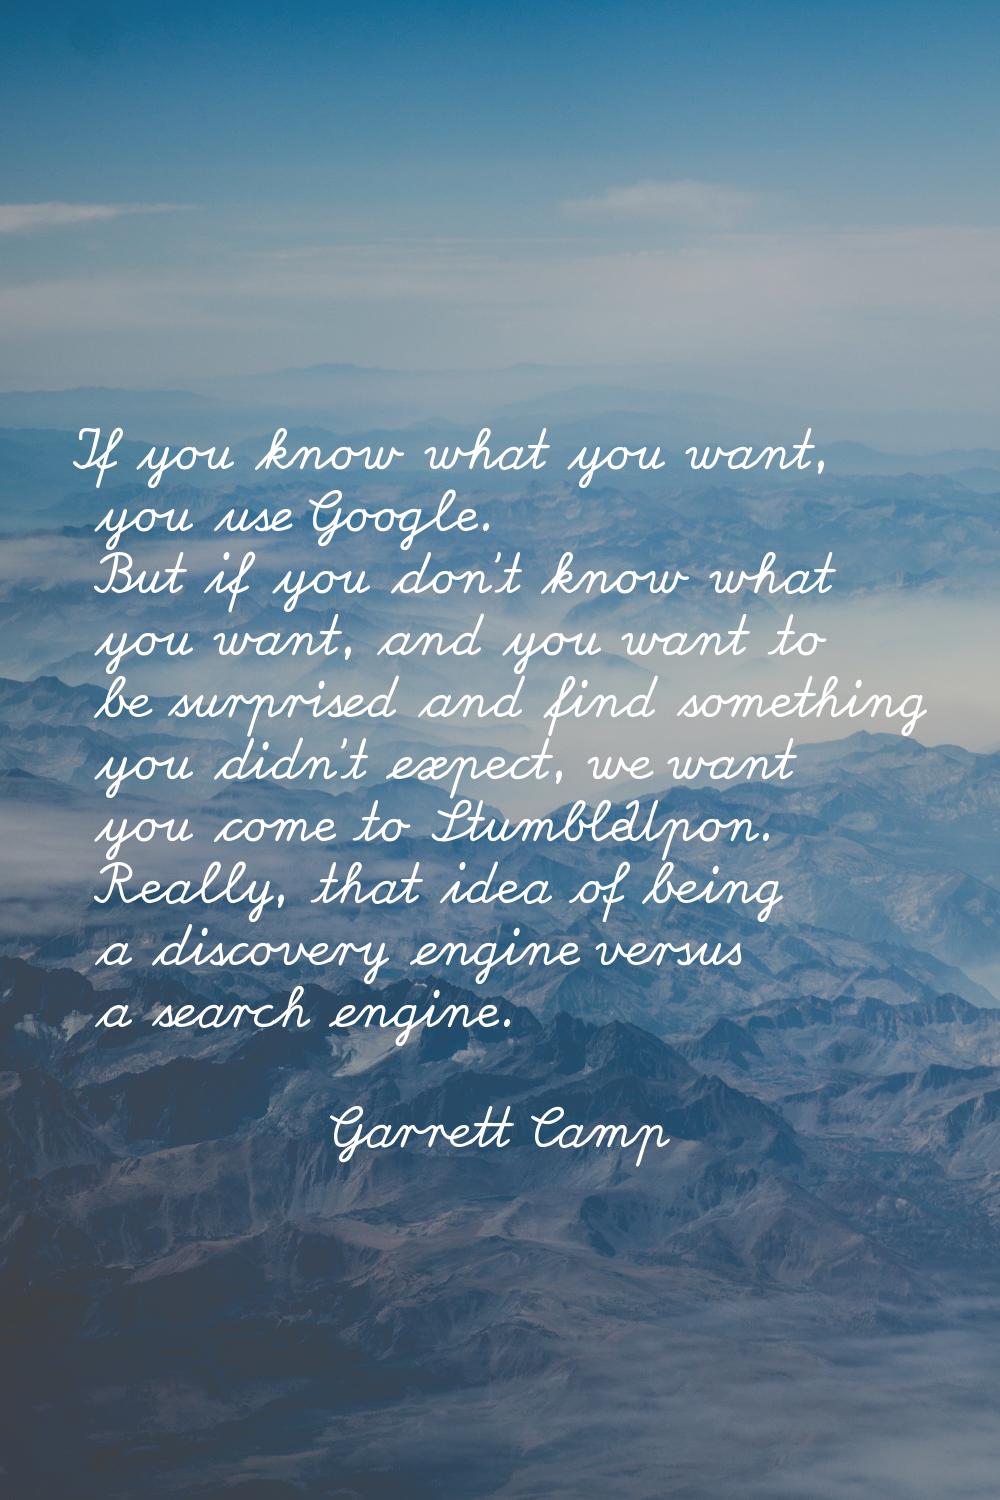 If you know what you want, you use Google. But if you don't know what you want, and you want to be 